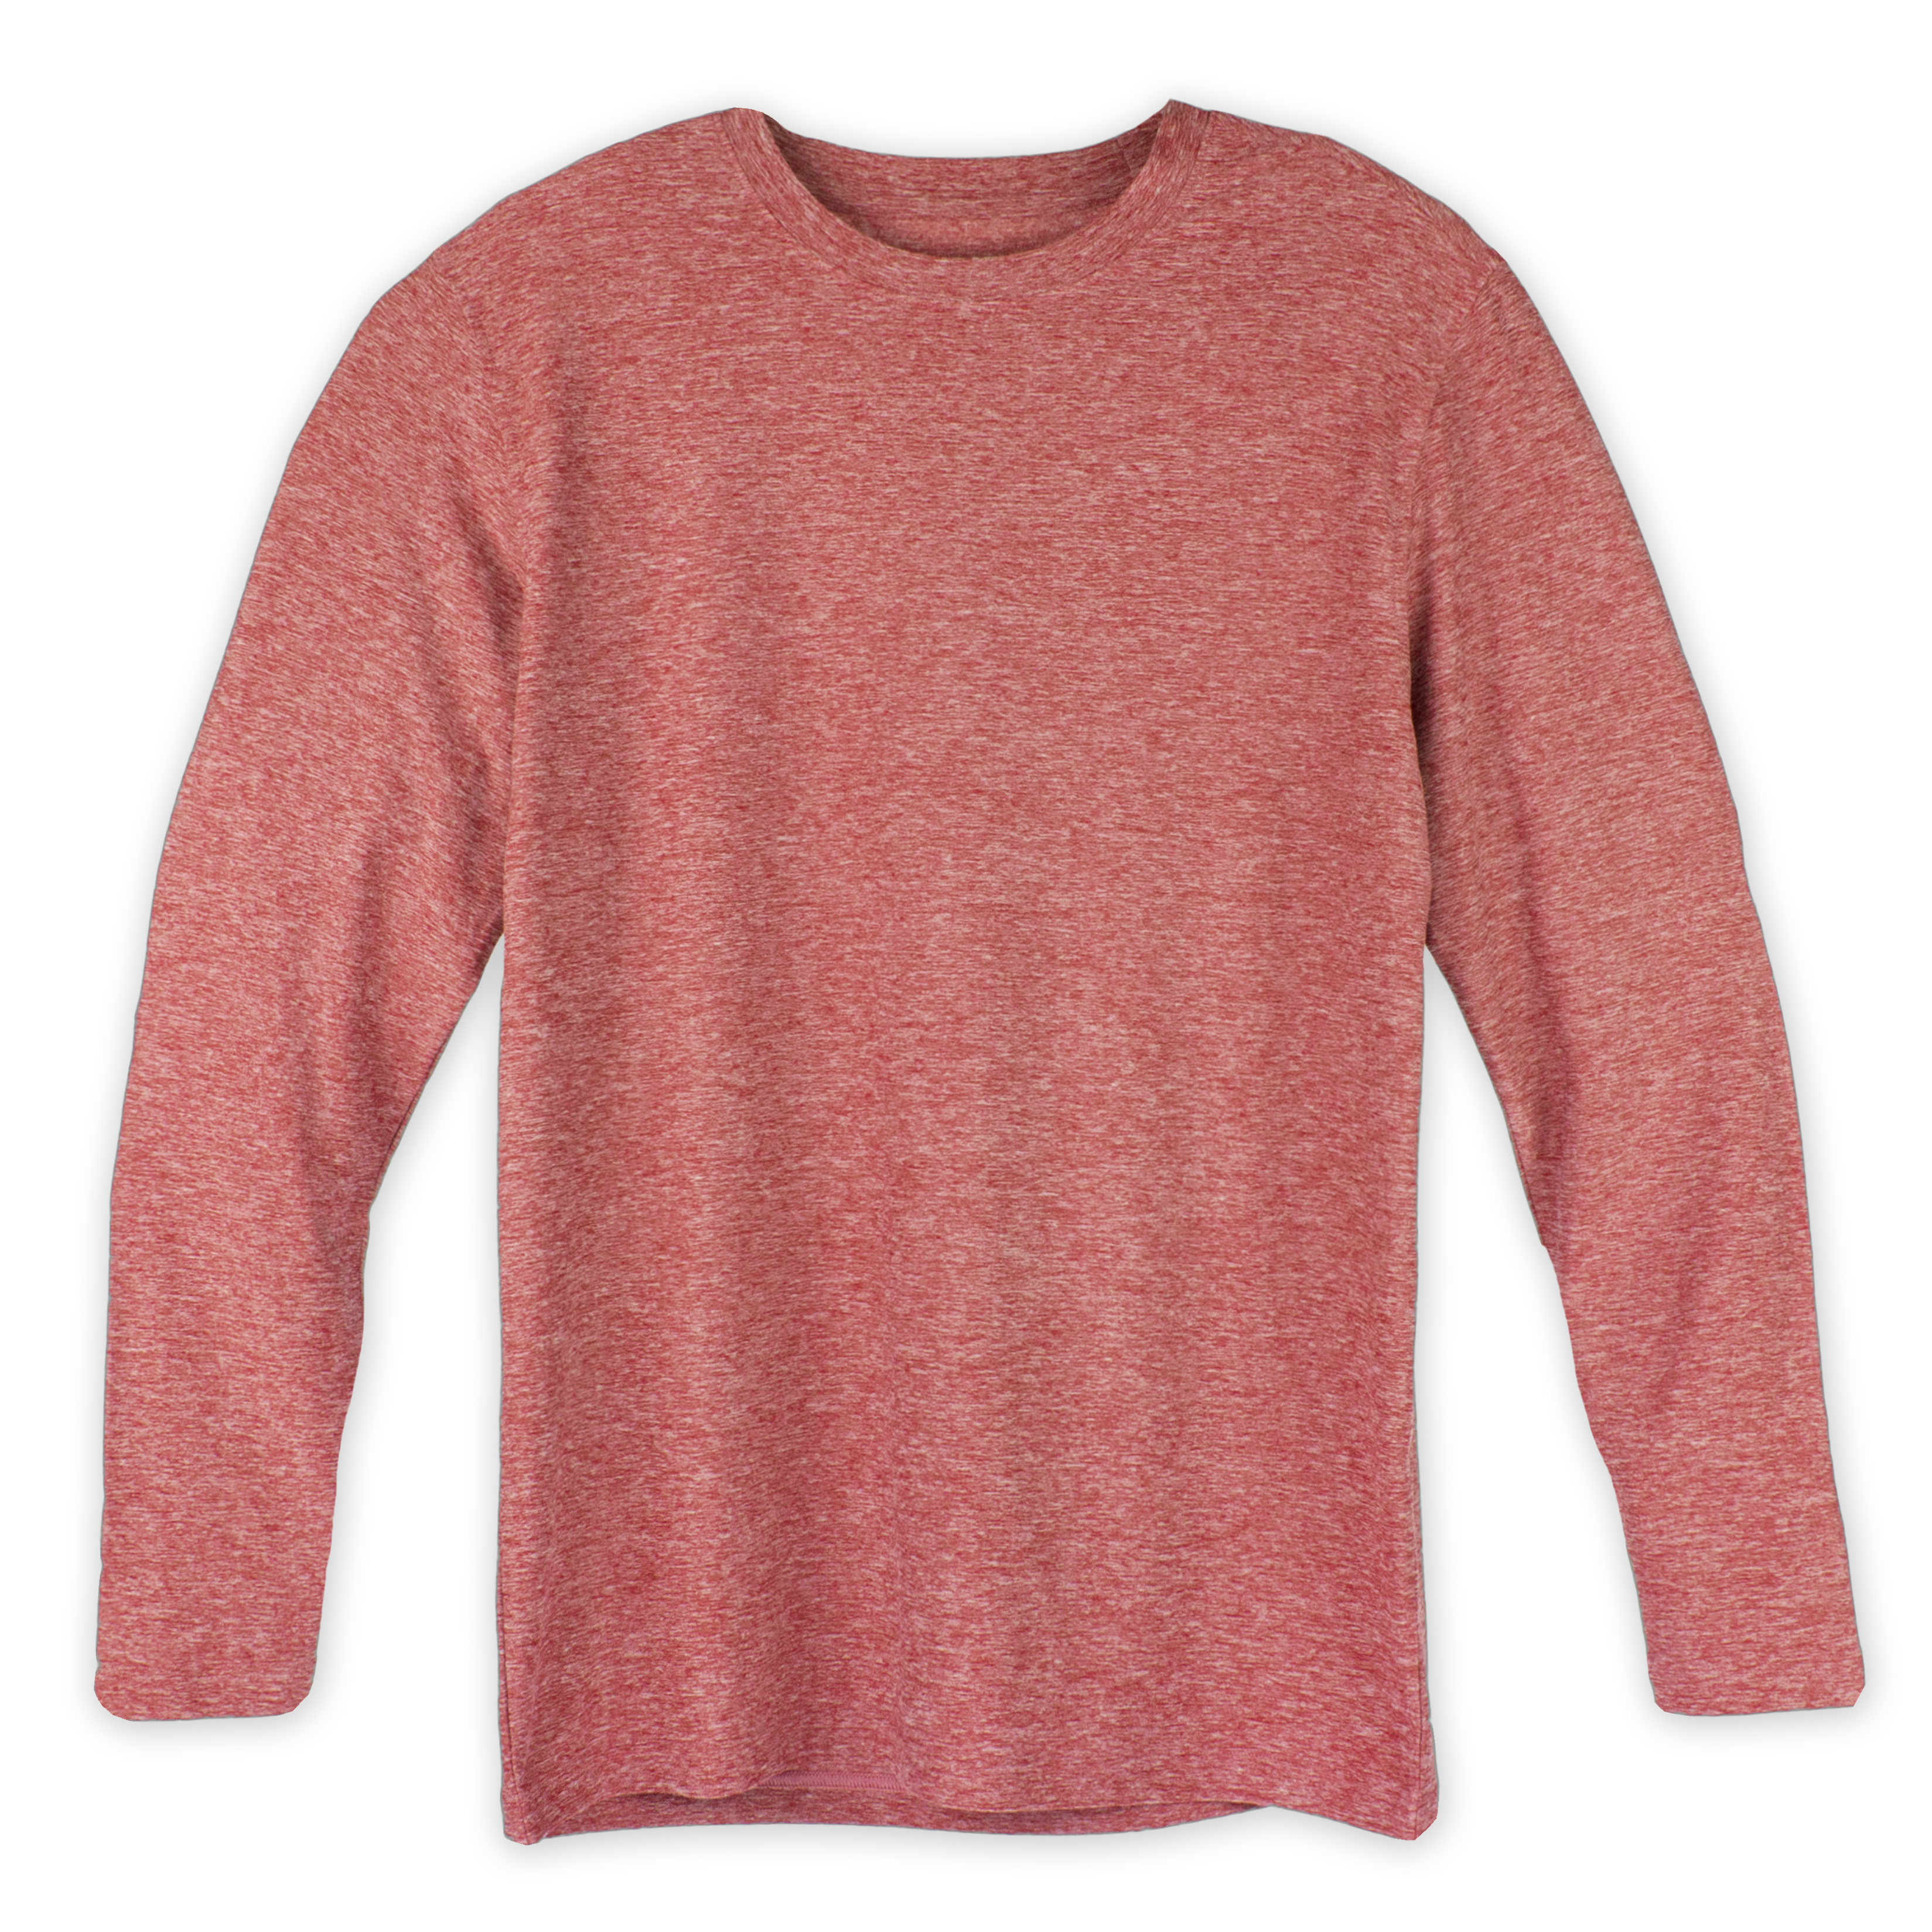 Long Sleeve Tech Tee Rhubarb pink front with crewneck and heathered color